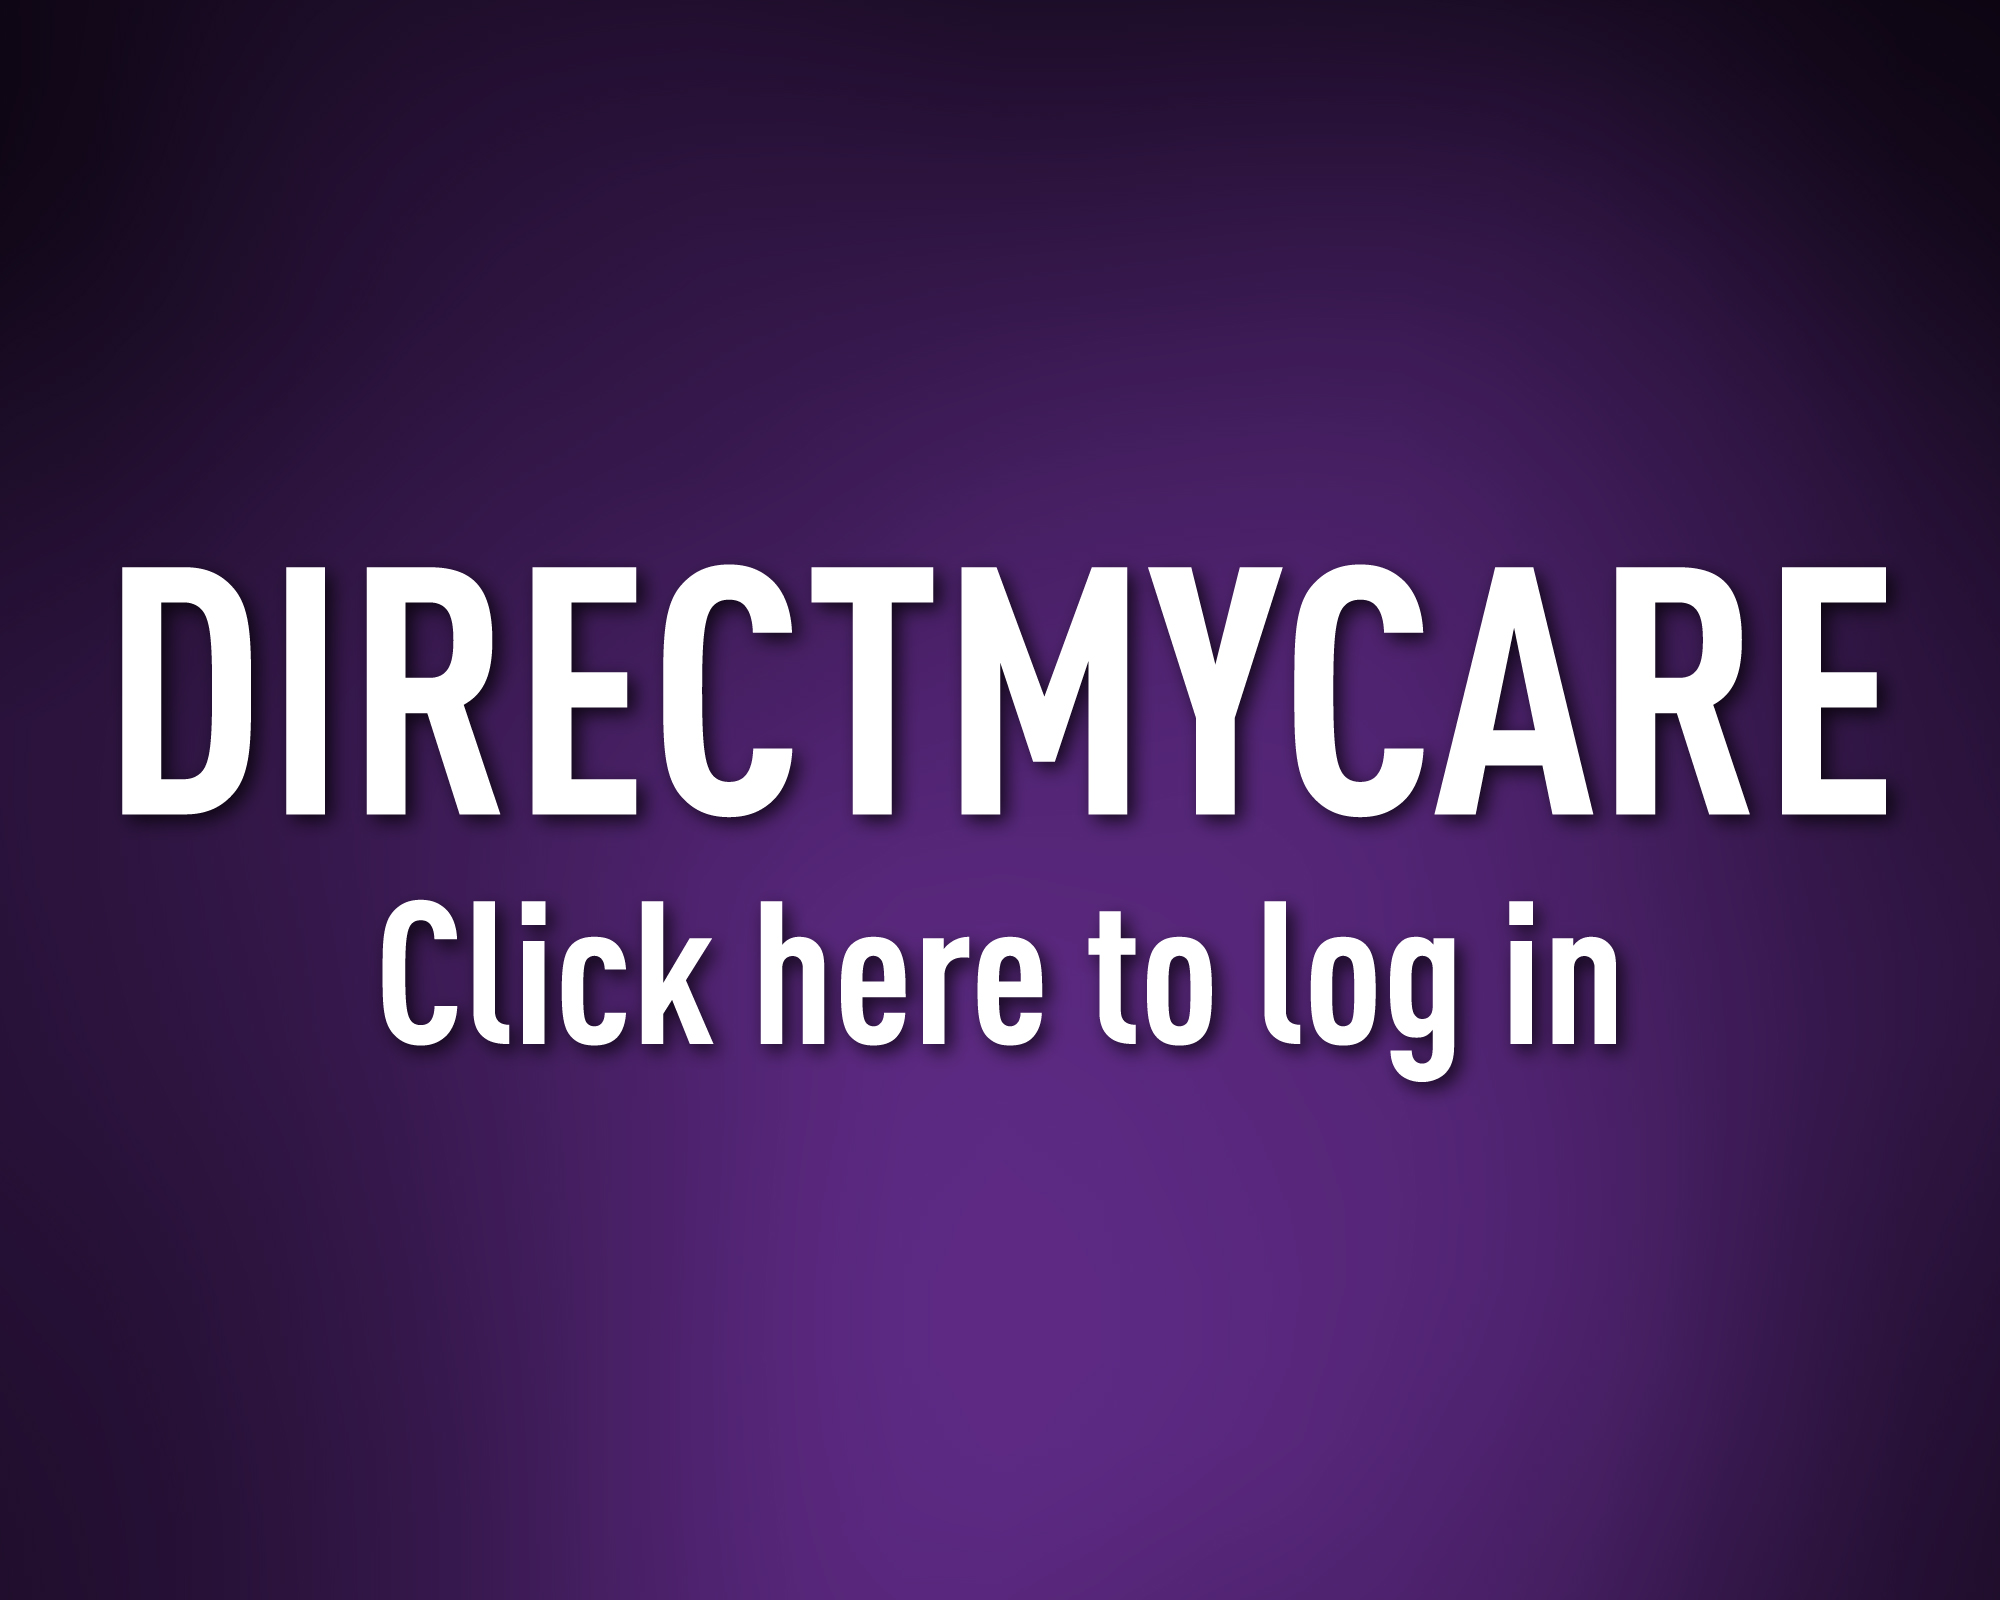 DirectMyCare. Click here to log in